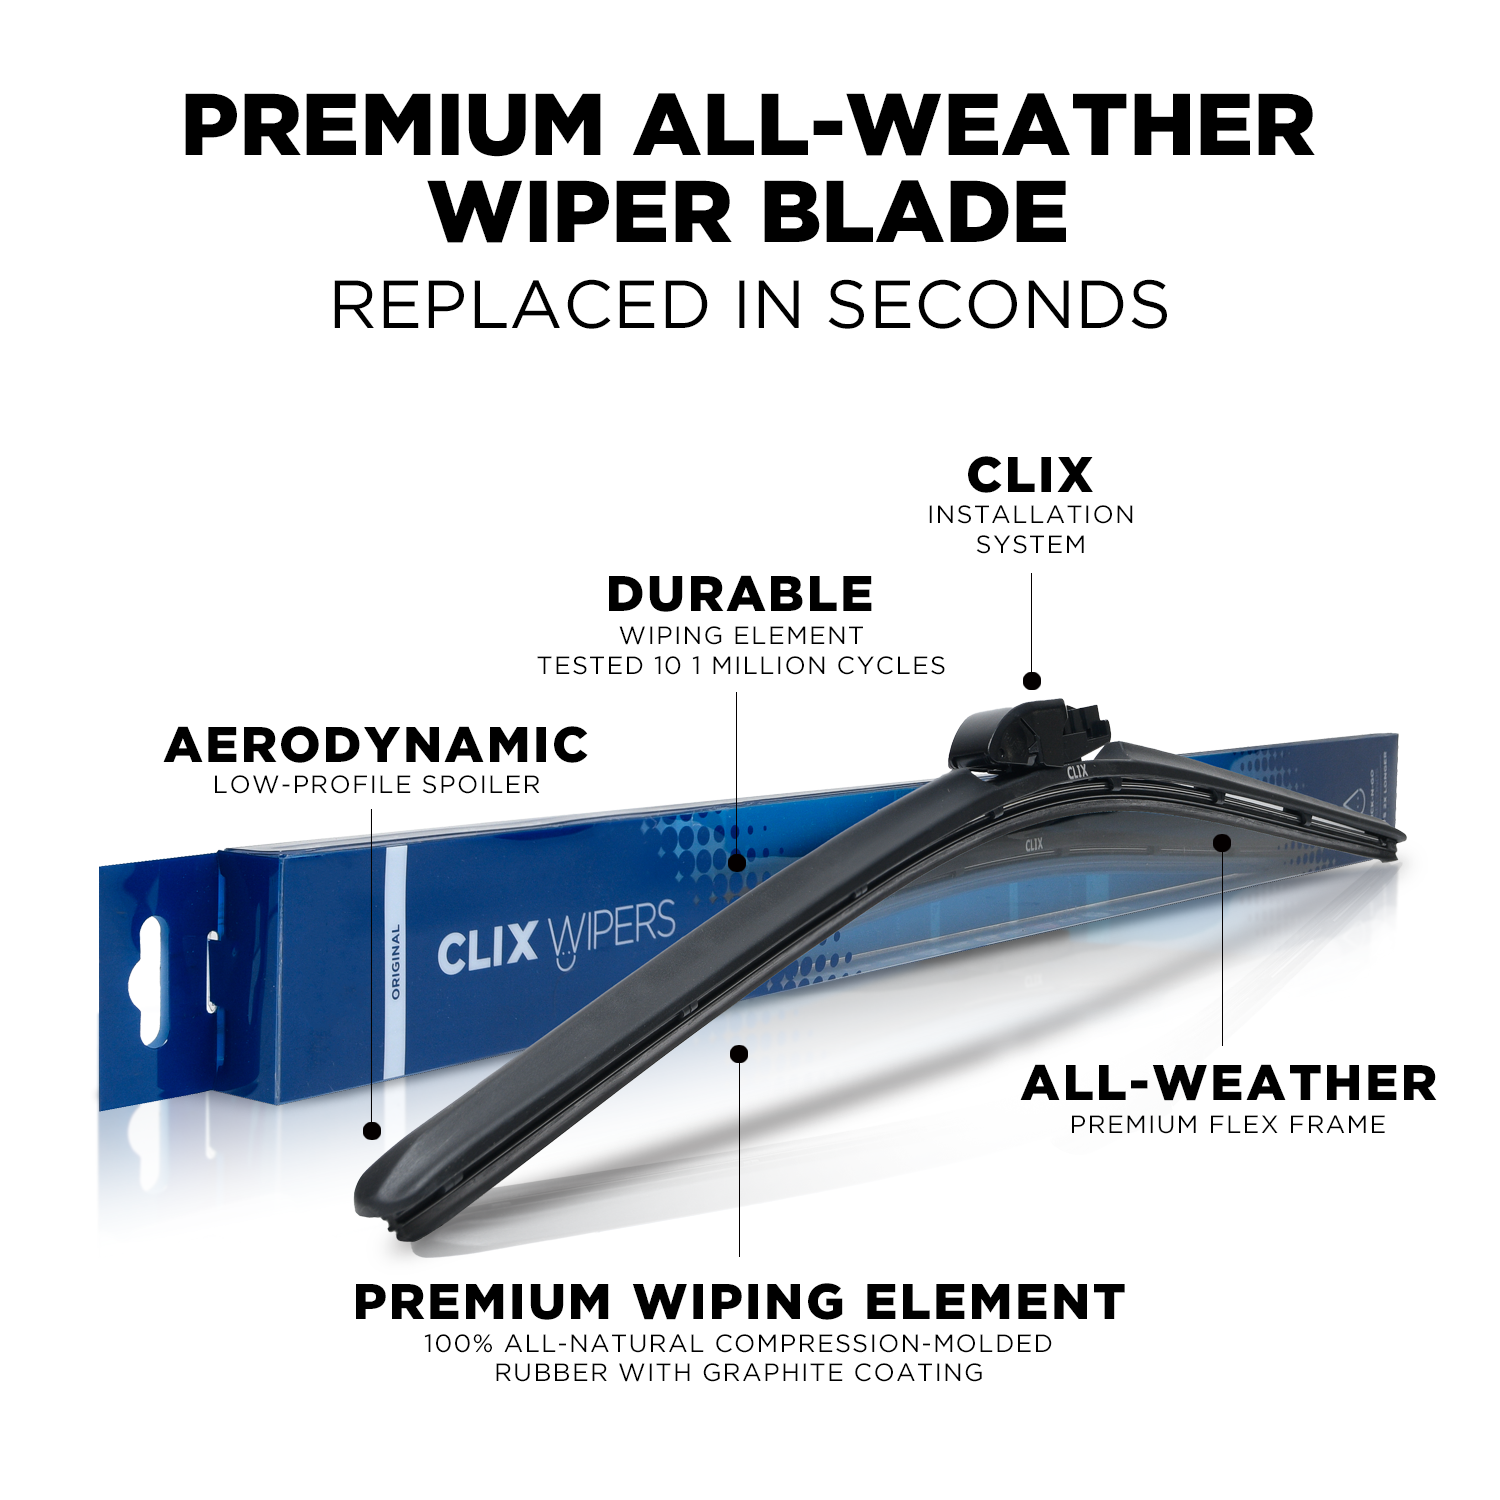 Factory Tesla Model 3 Model Y Windshield Wiper Blades 2017 2018 2019 2020  2021 2022 2023 26/19 with 20 Pieces Car Windshield Concentrated Washer